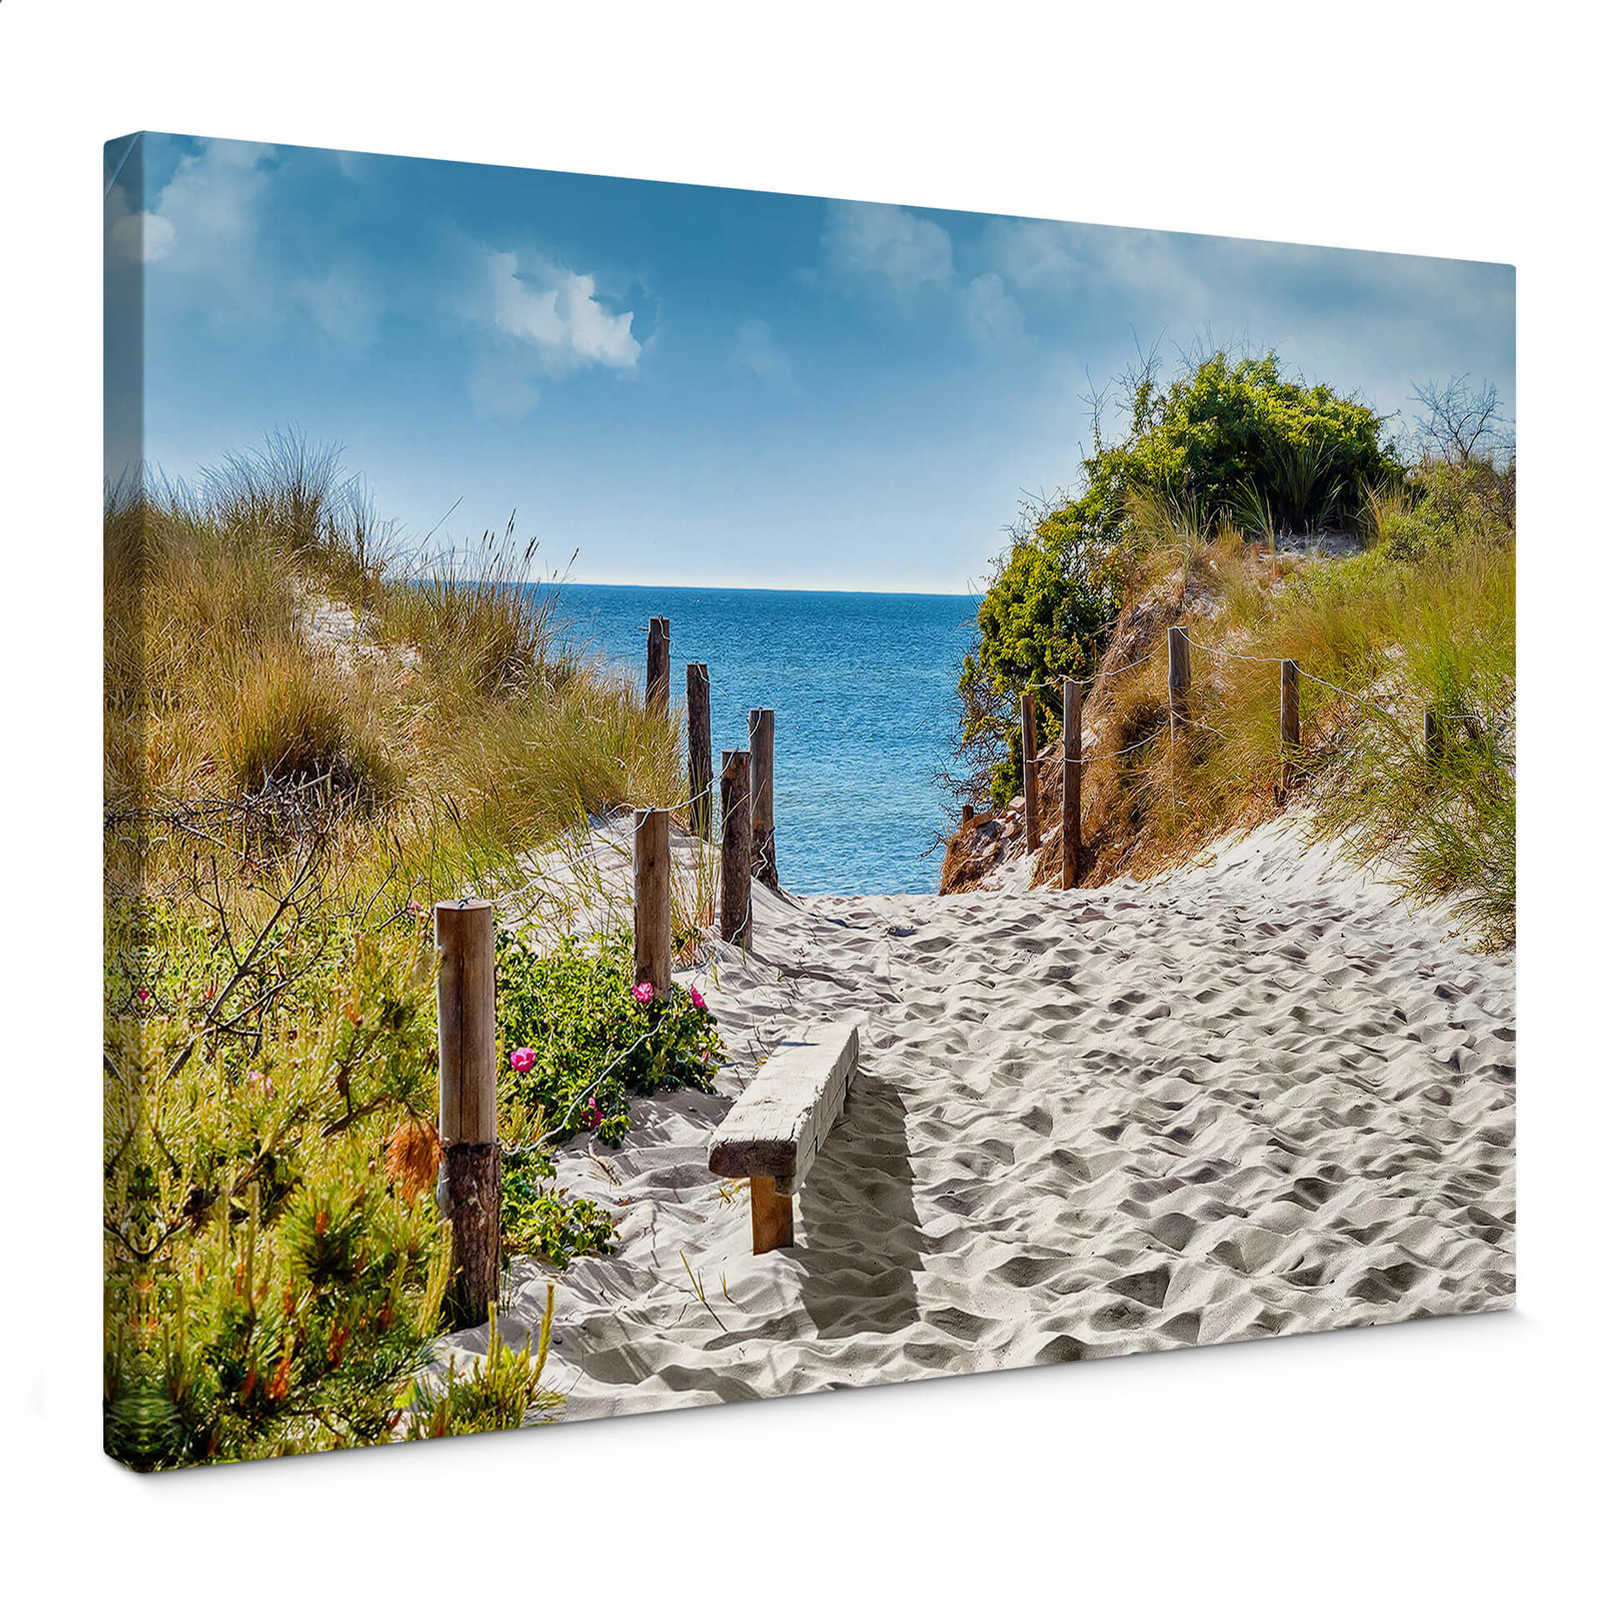         Canvas print dune crossing with sea view
    